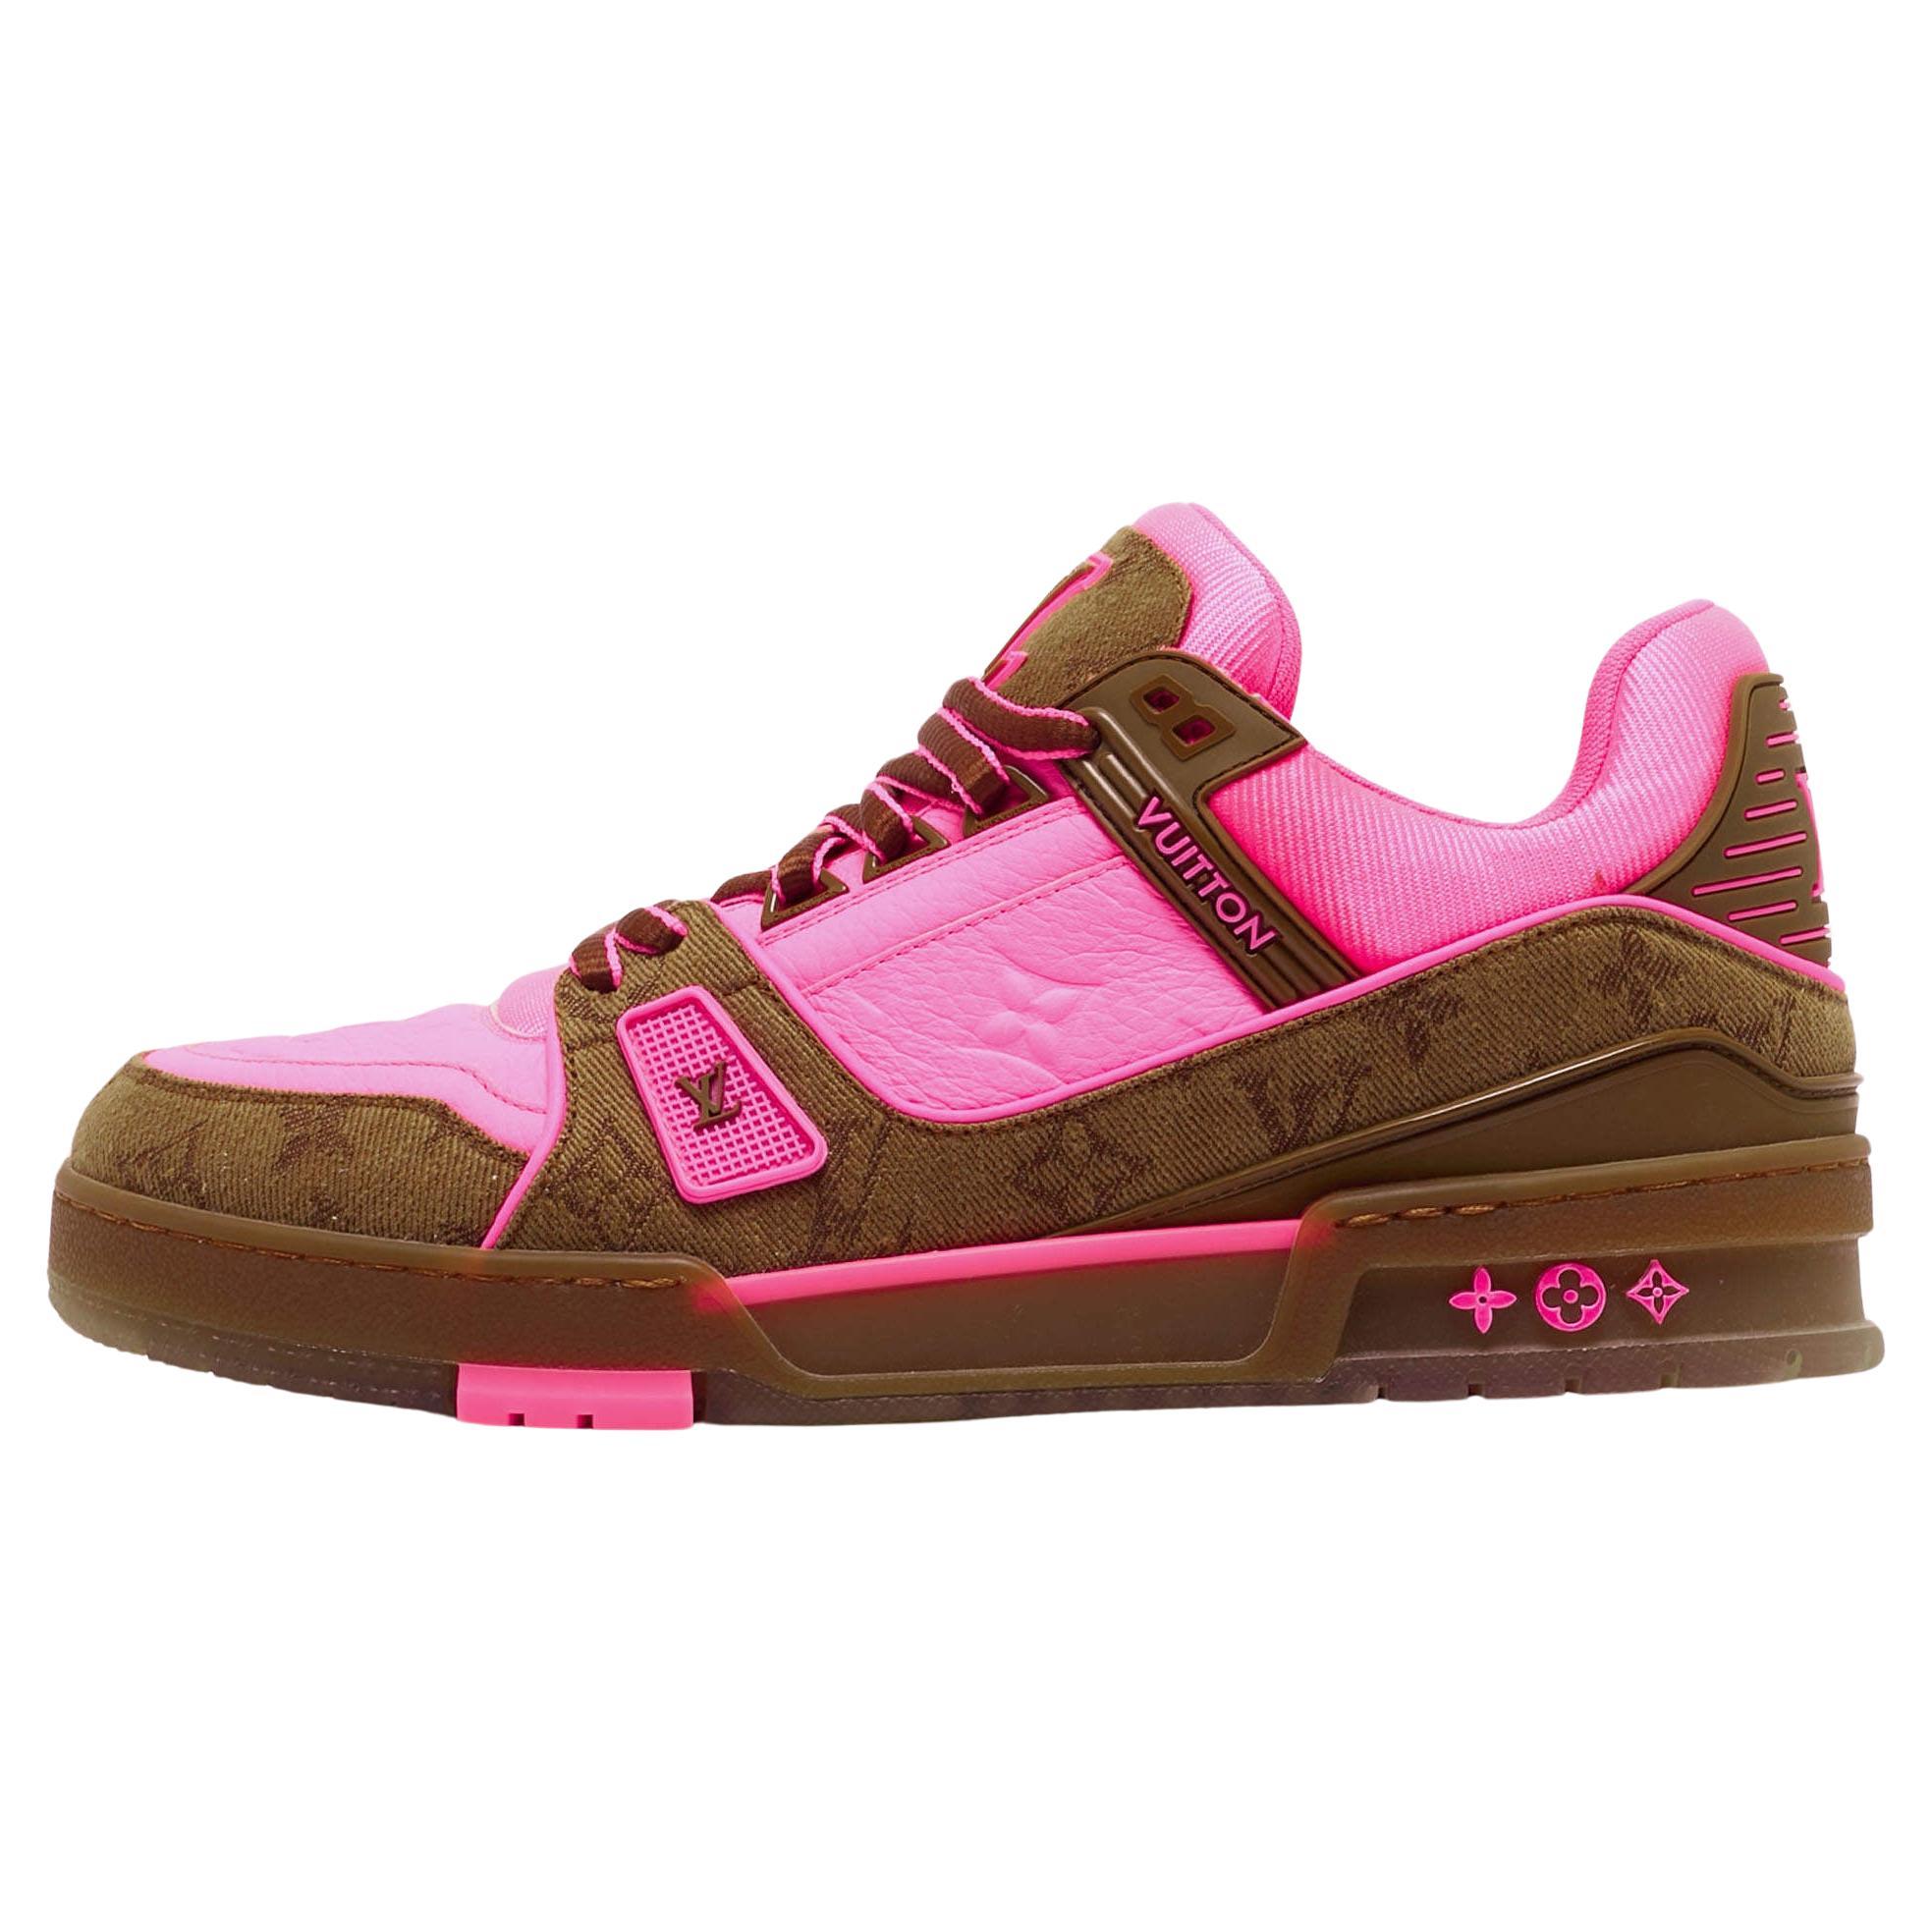 Louis Vuitton Neon Pink/Brown Monogram Leather and Canvas LV Trainer Sneakers Si